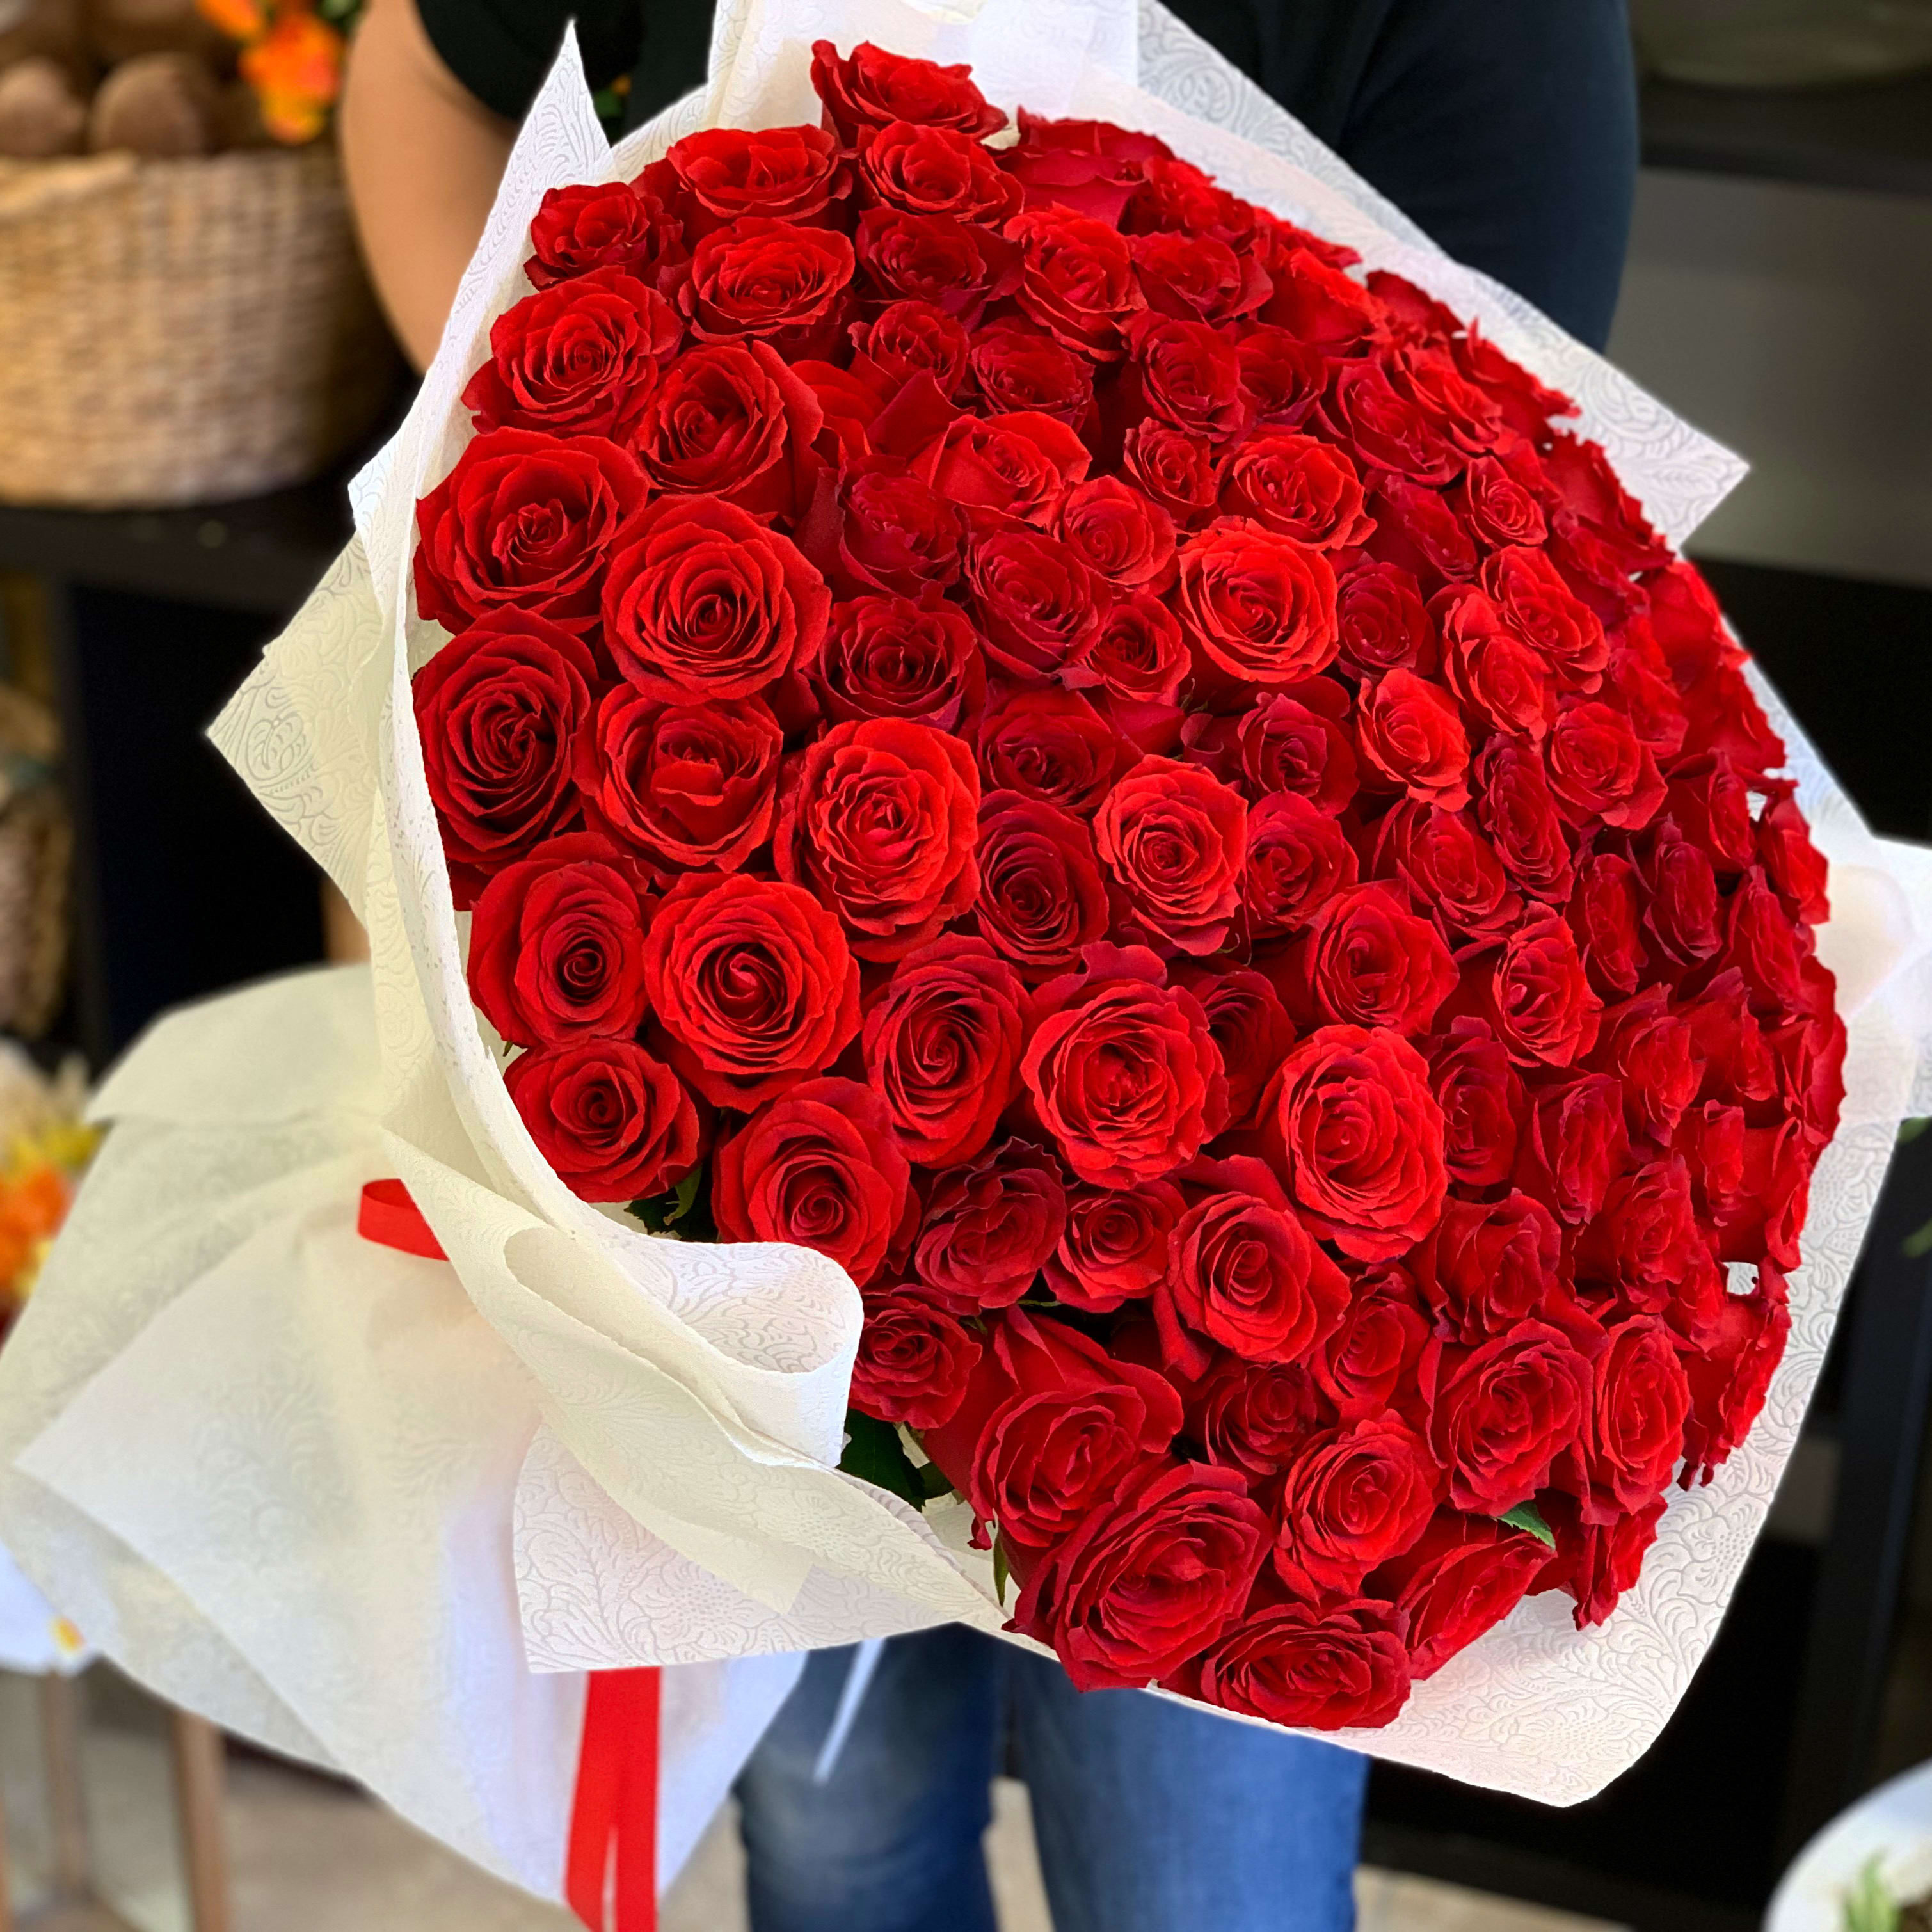 100 Red Roses Hand-crafted Bouquet in Miami Beach, FL | Luxury Flowers Miami